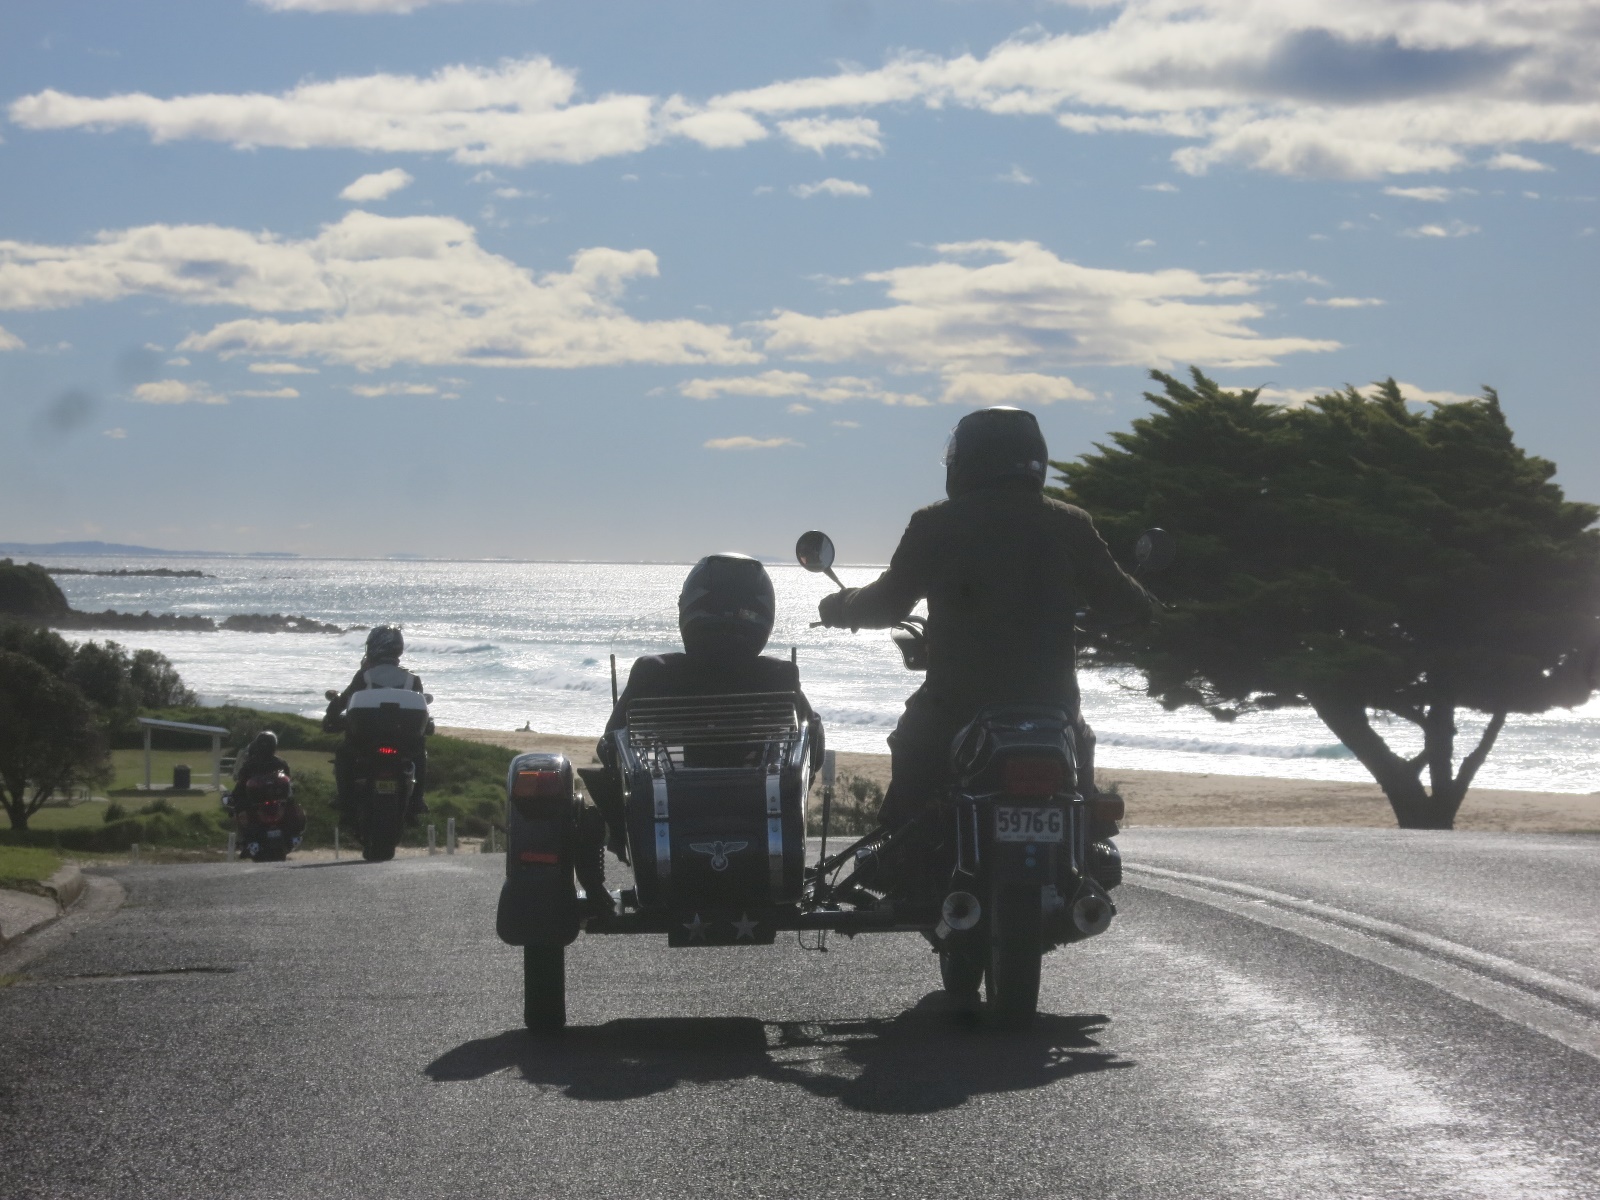 A group of people ride motorcycles down a road Description automatically generated with low confidence